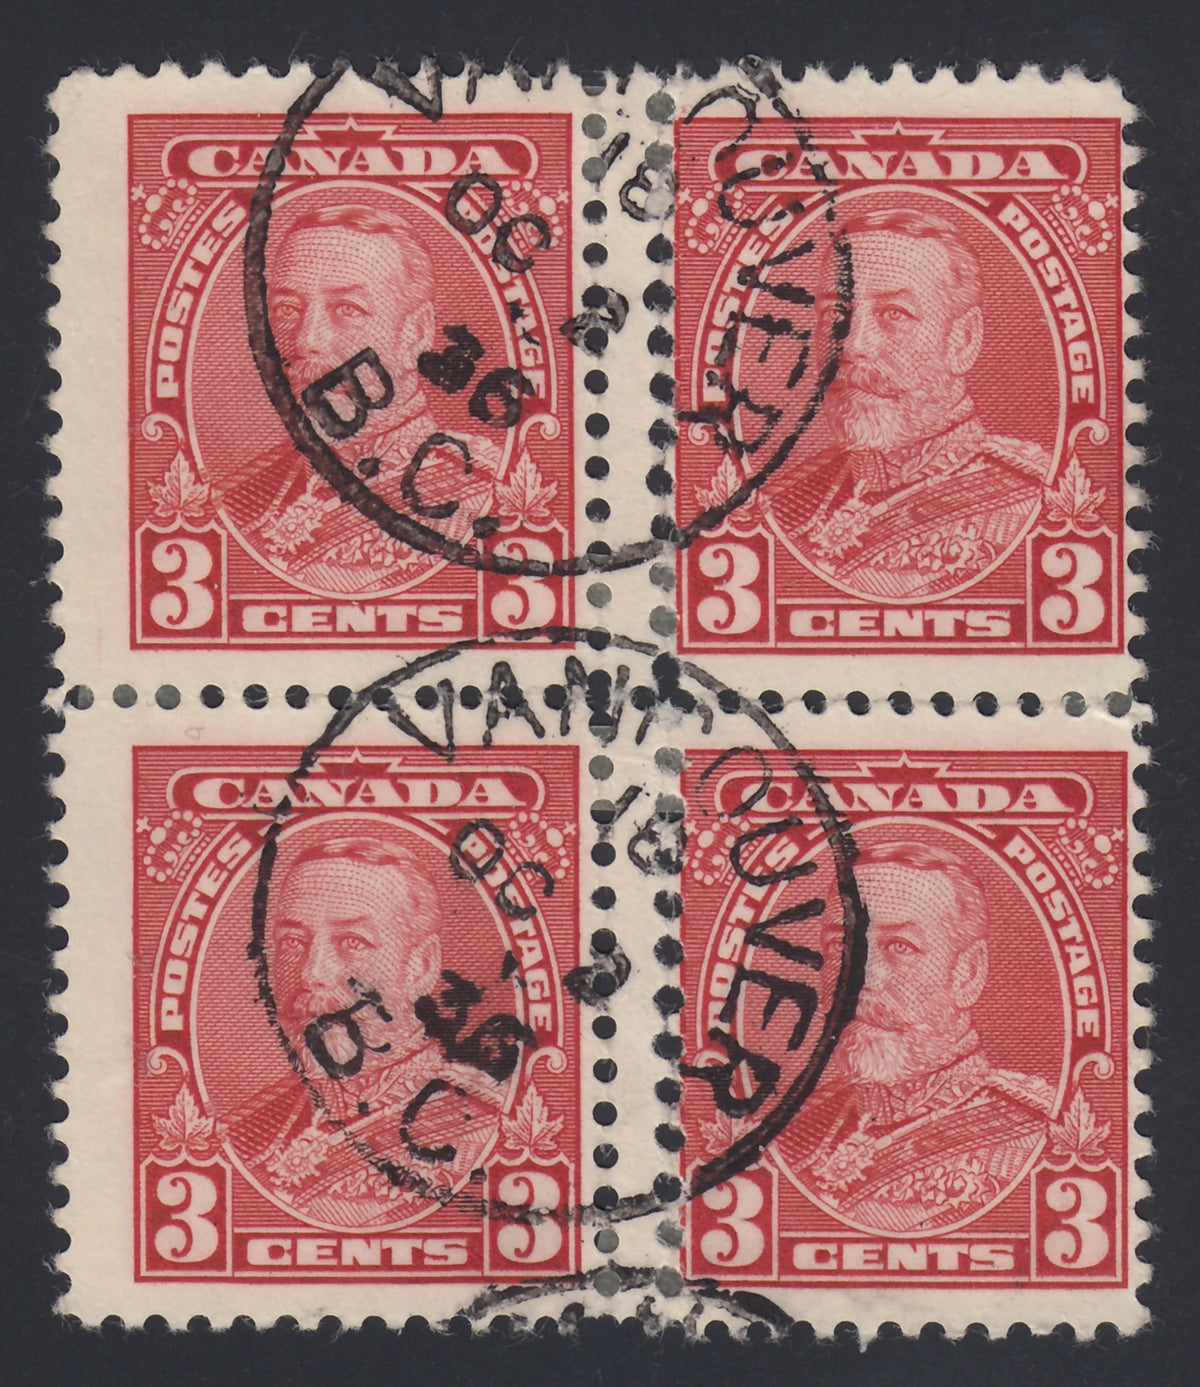 0219CA2105 - Canada #219 - Used Block, Double Perf.